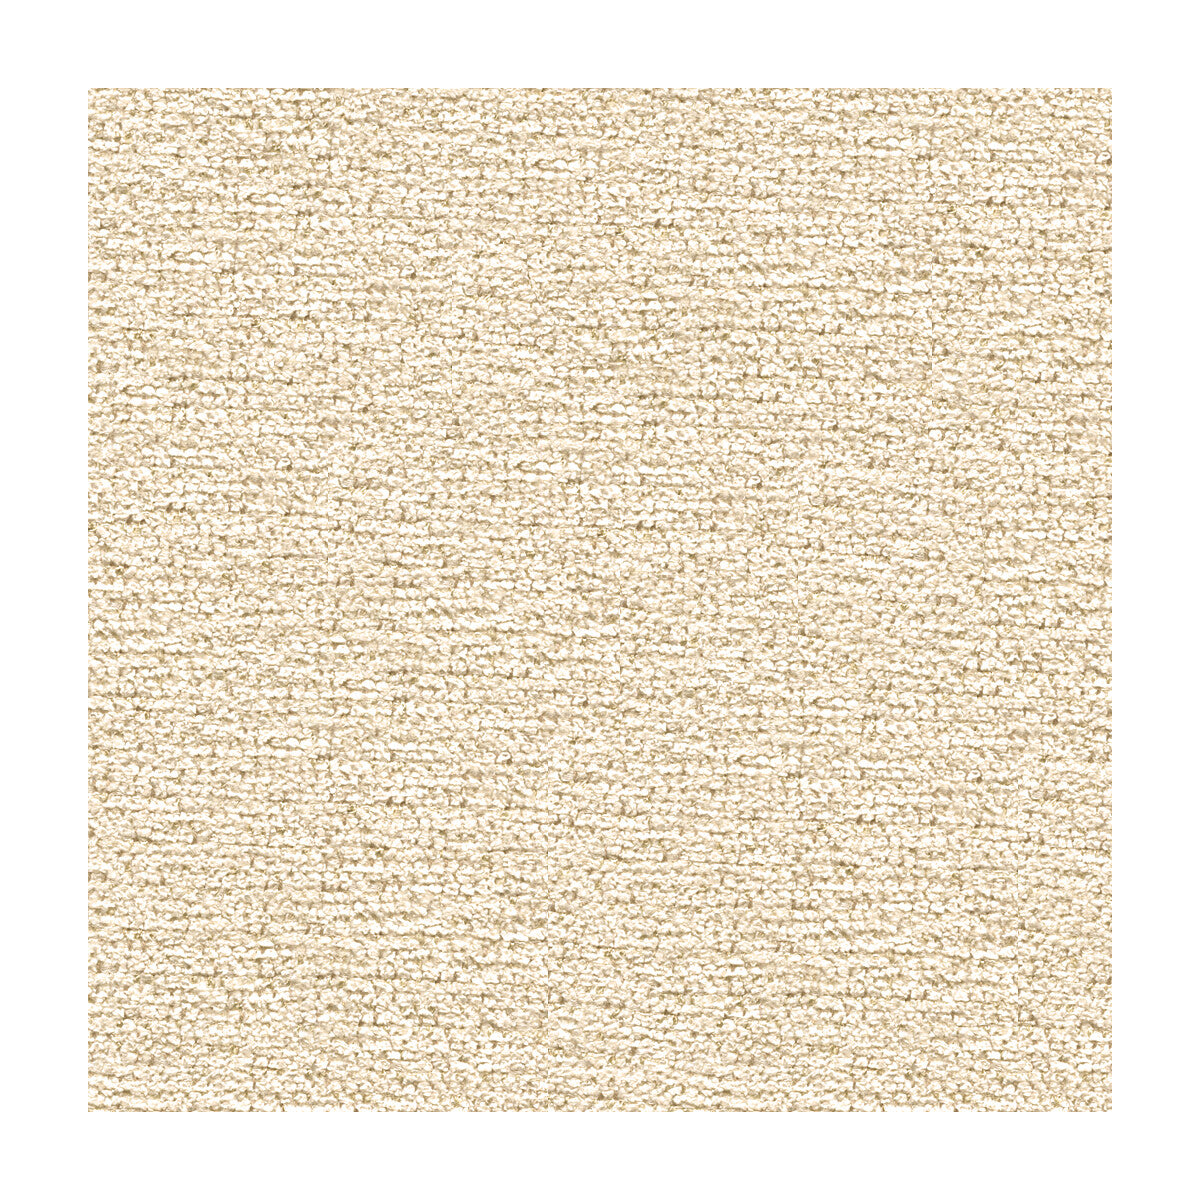 Love Me fabric in pearl color - pattern 33553.1116.0 - by Kravet Couture in the Modern Luxe collection